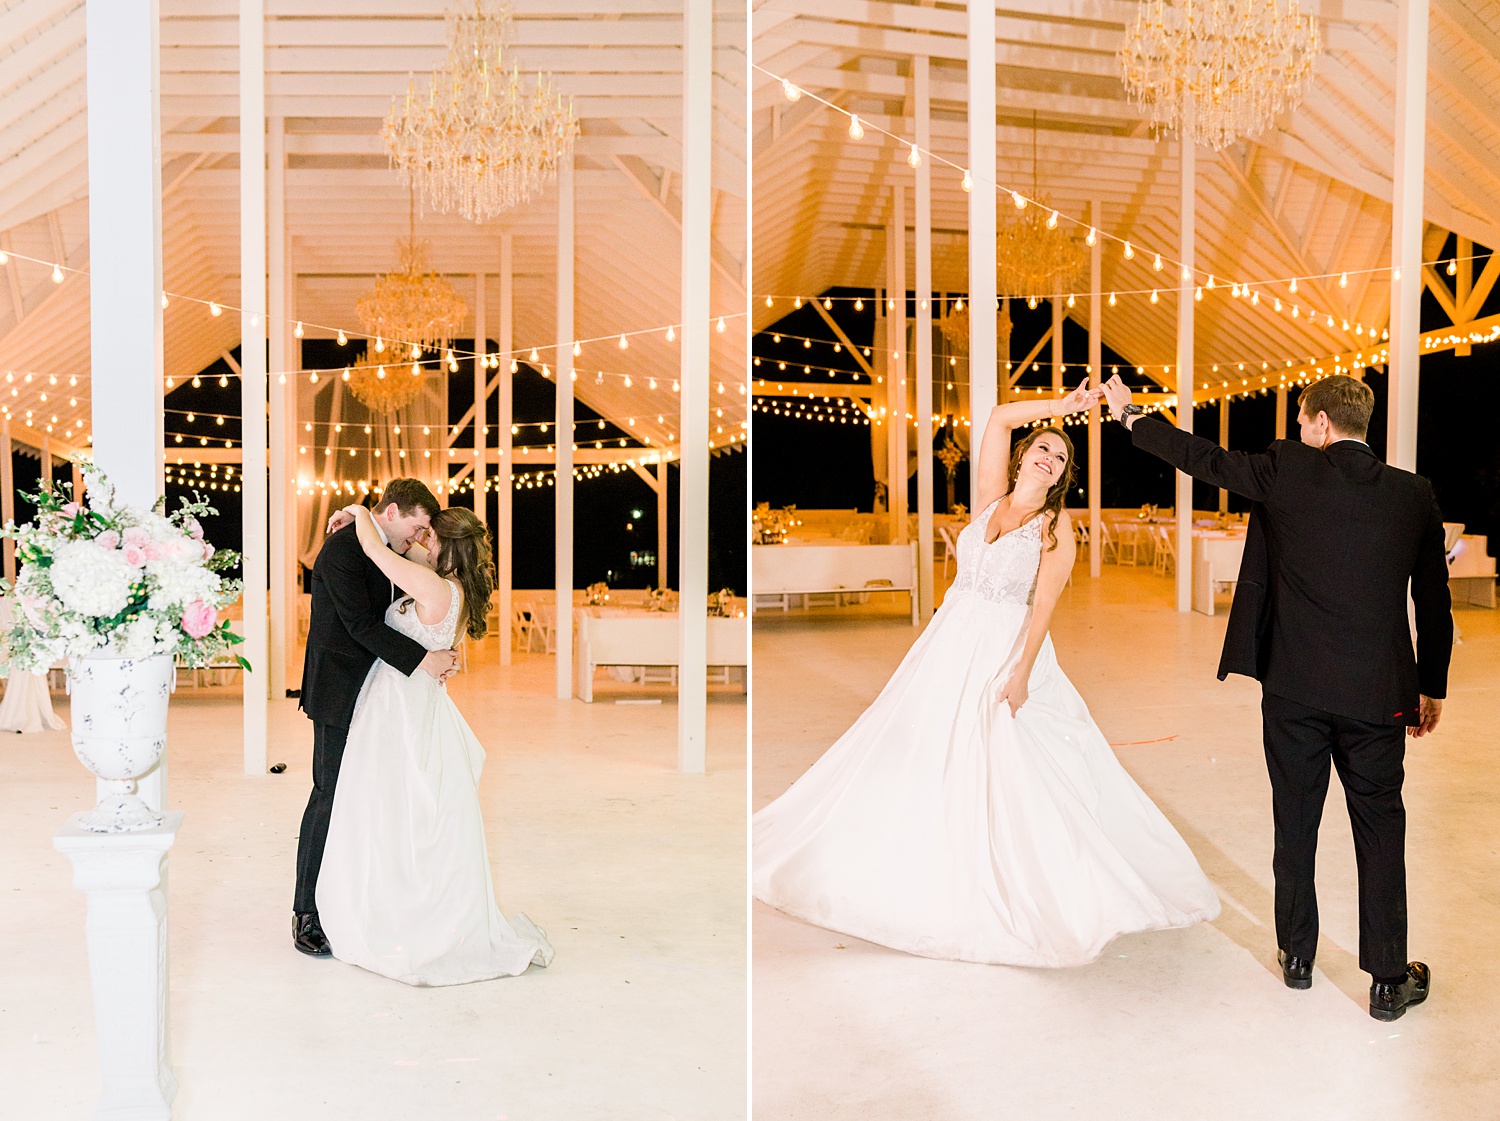 private last dance to end Alabama wedding reception